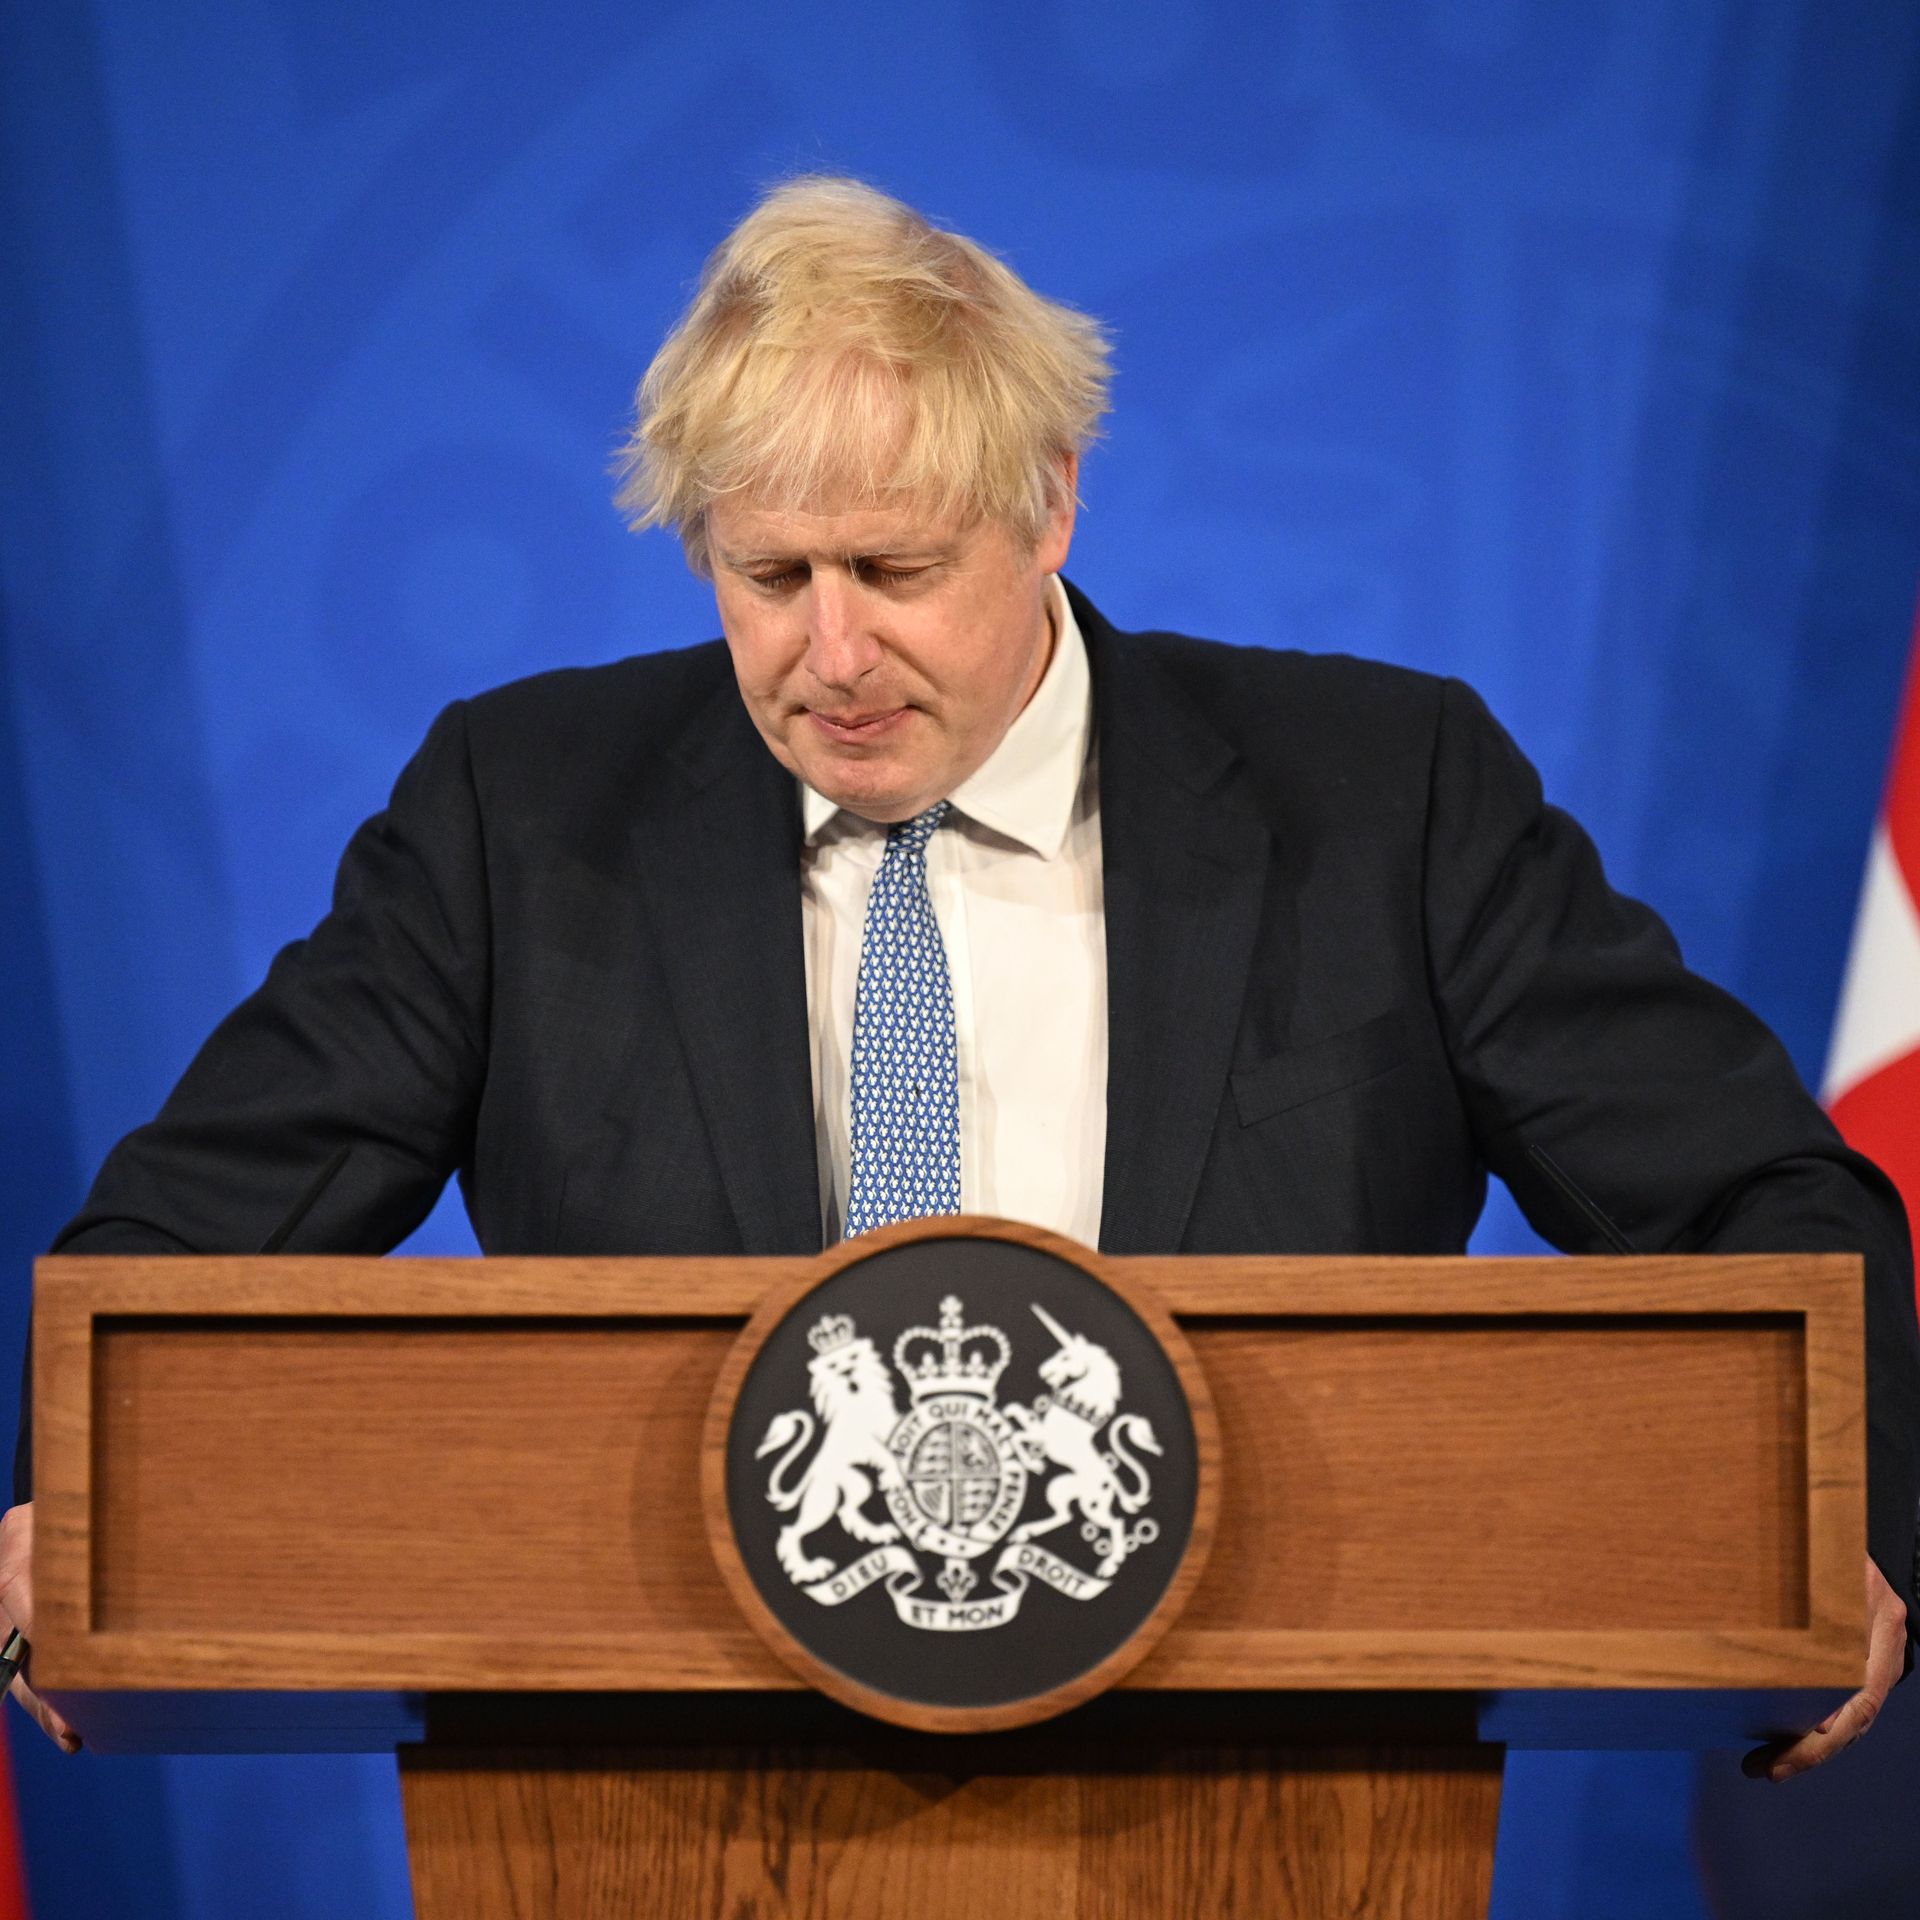 Prime Minister Boris Johnson holds a press conference in response to the publication of the Sue Gray report Into "Partygate" at Downing Street.